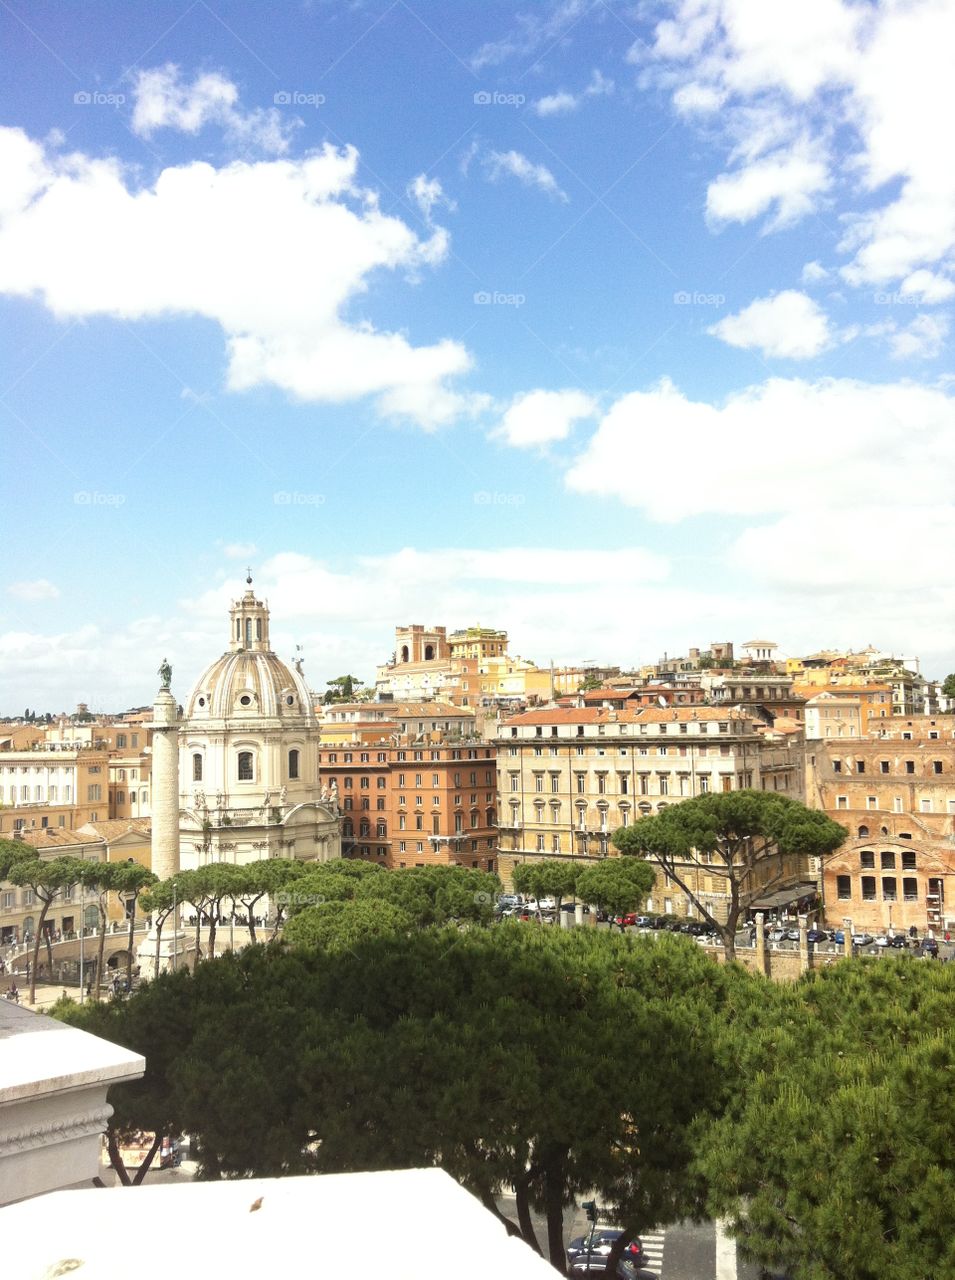 Rome from the rooftop. rooftop view